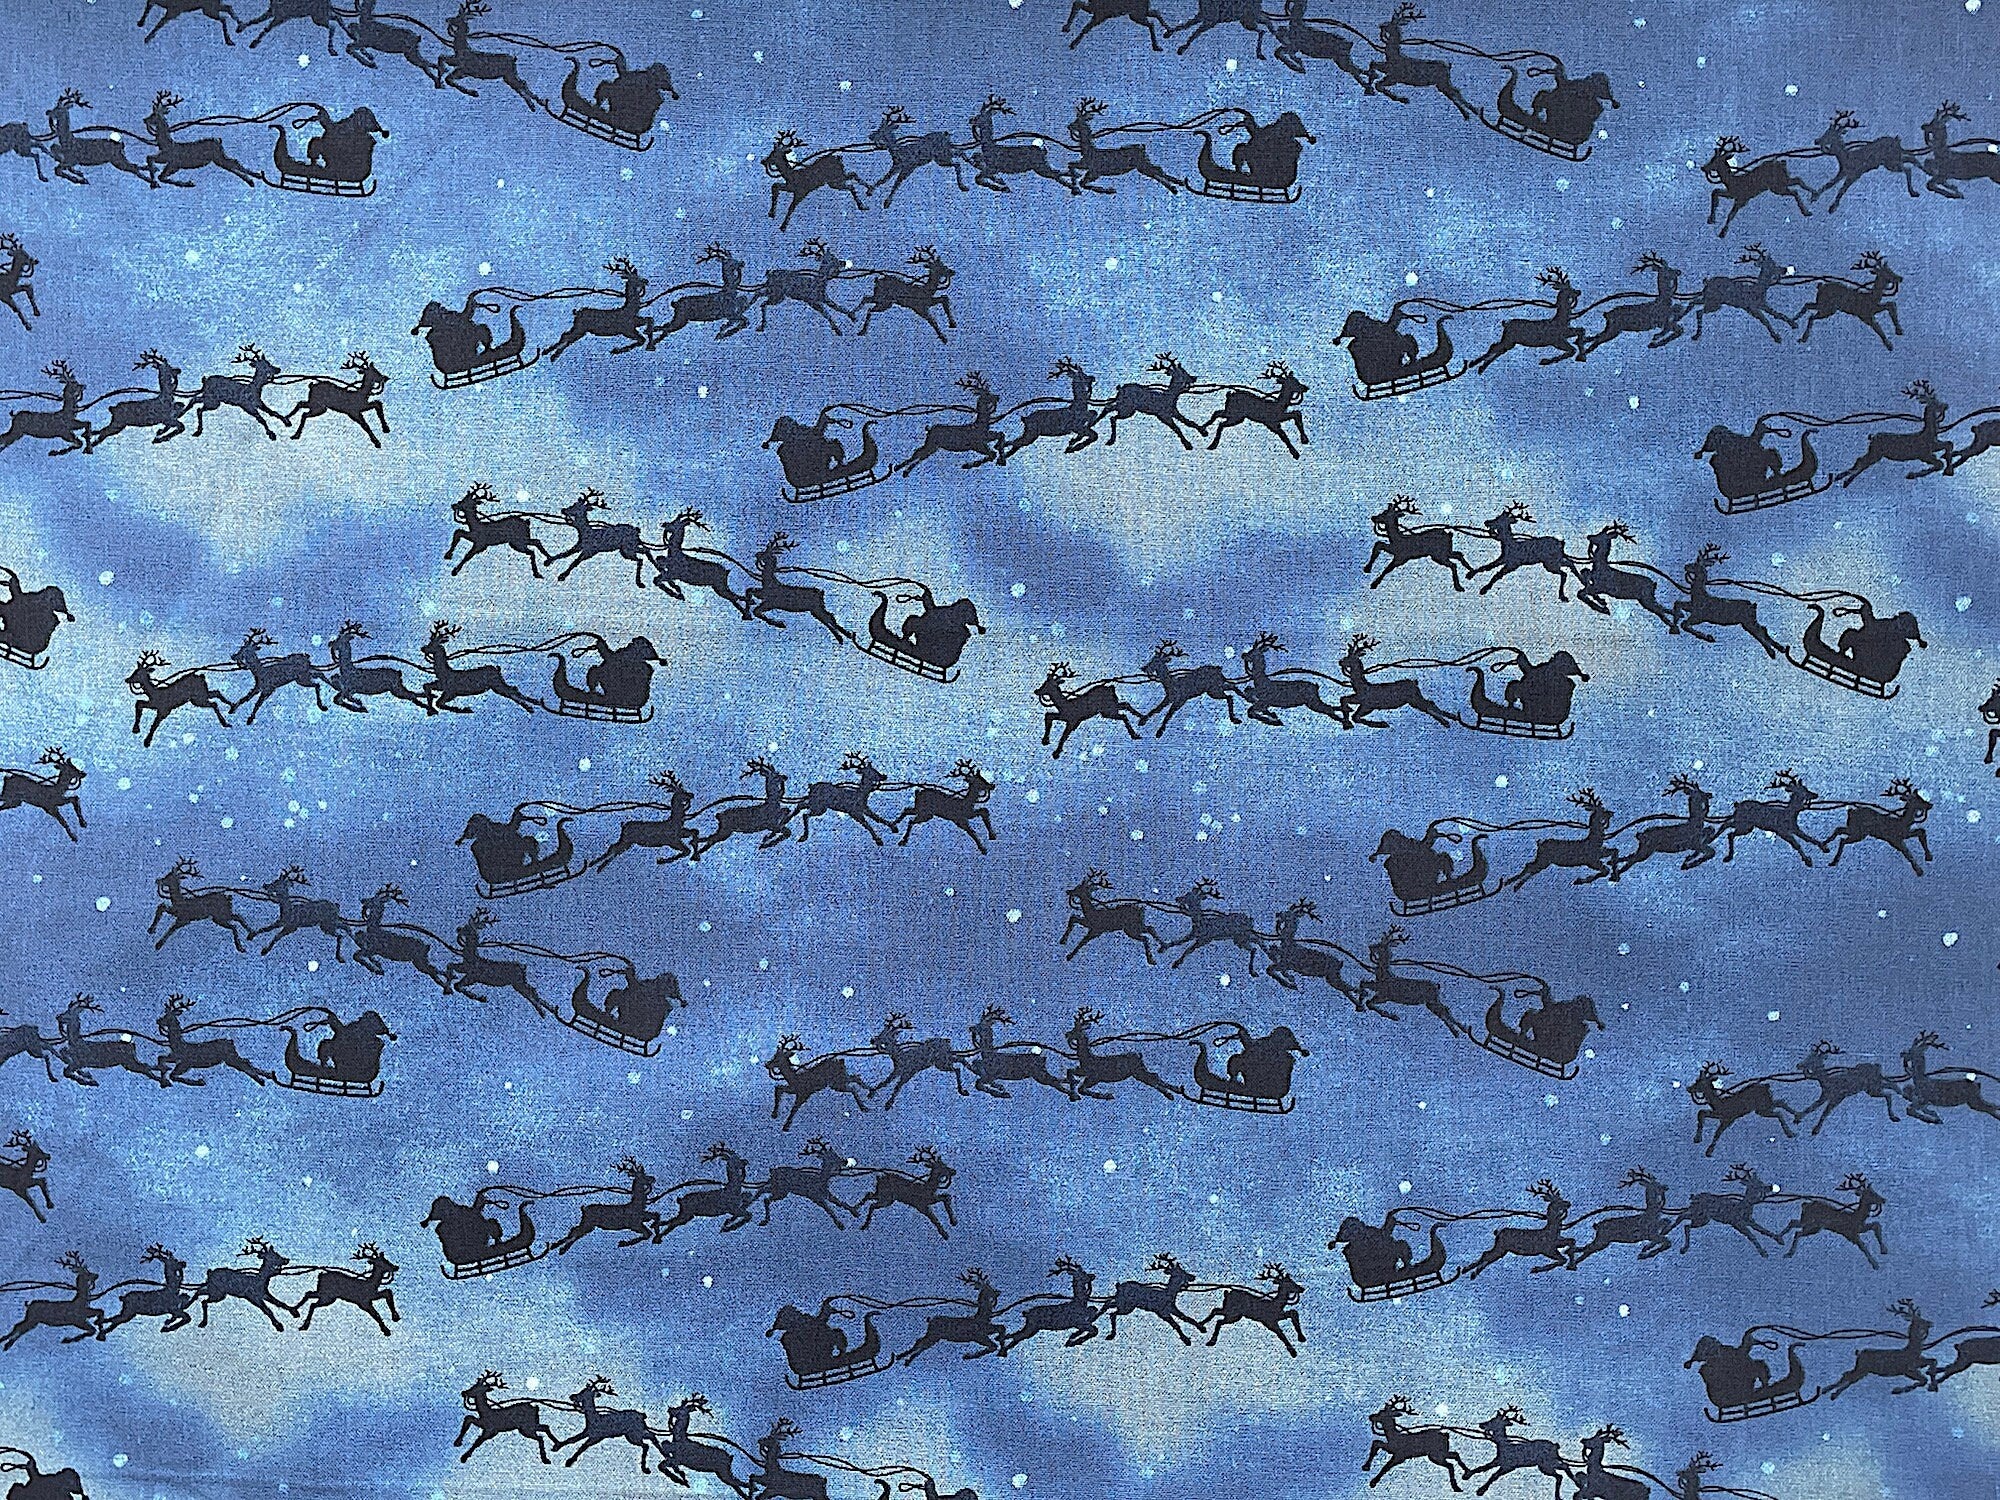 Santa and his reindeer are flying in the sky on this cotton fabric. Santa and his reindeer are black and the background has shades of blue and light tan.